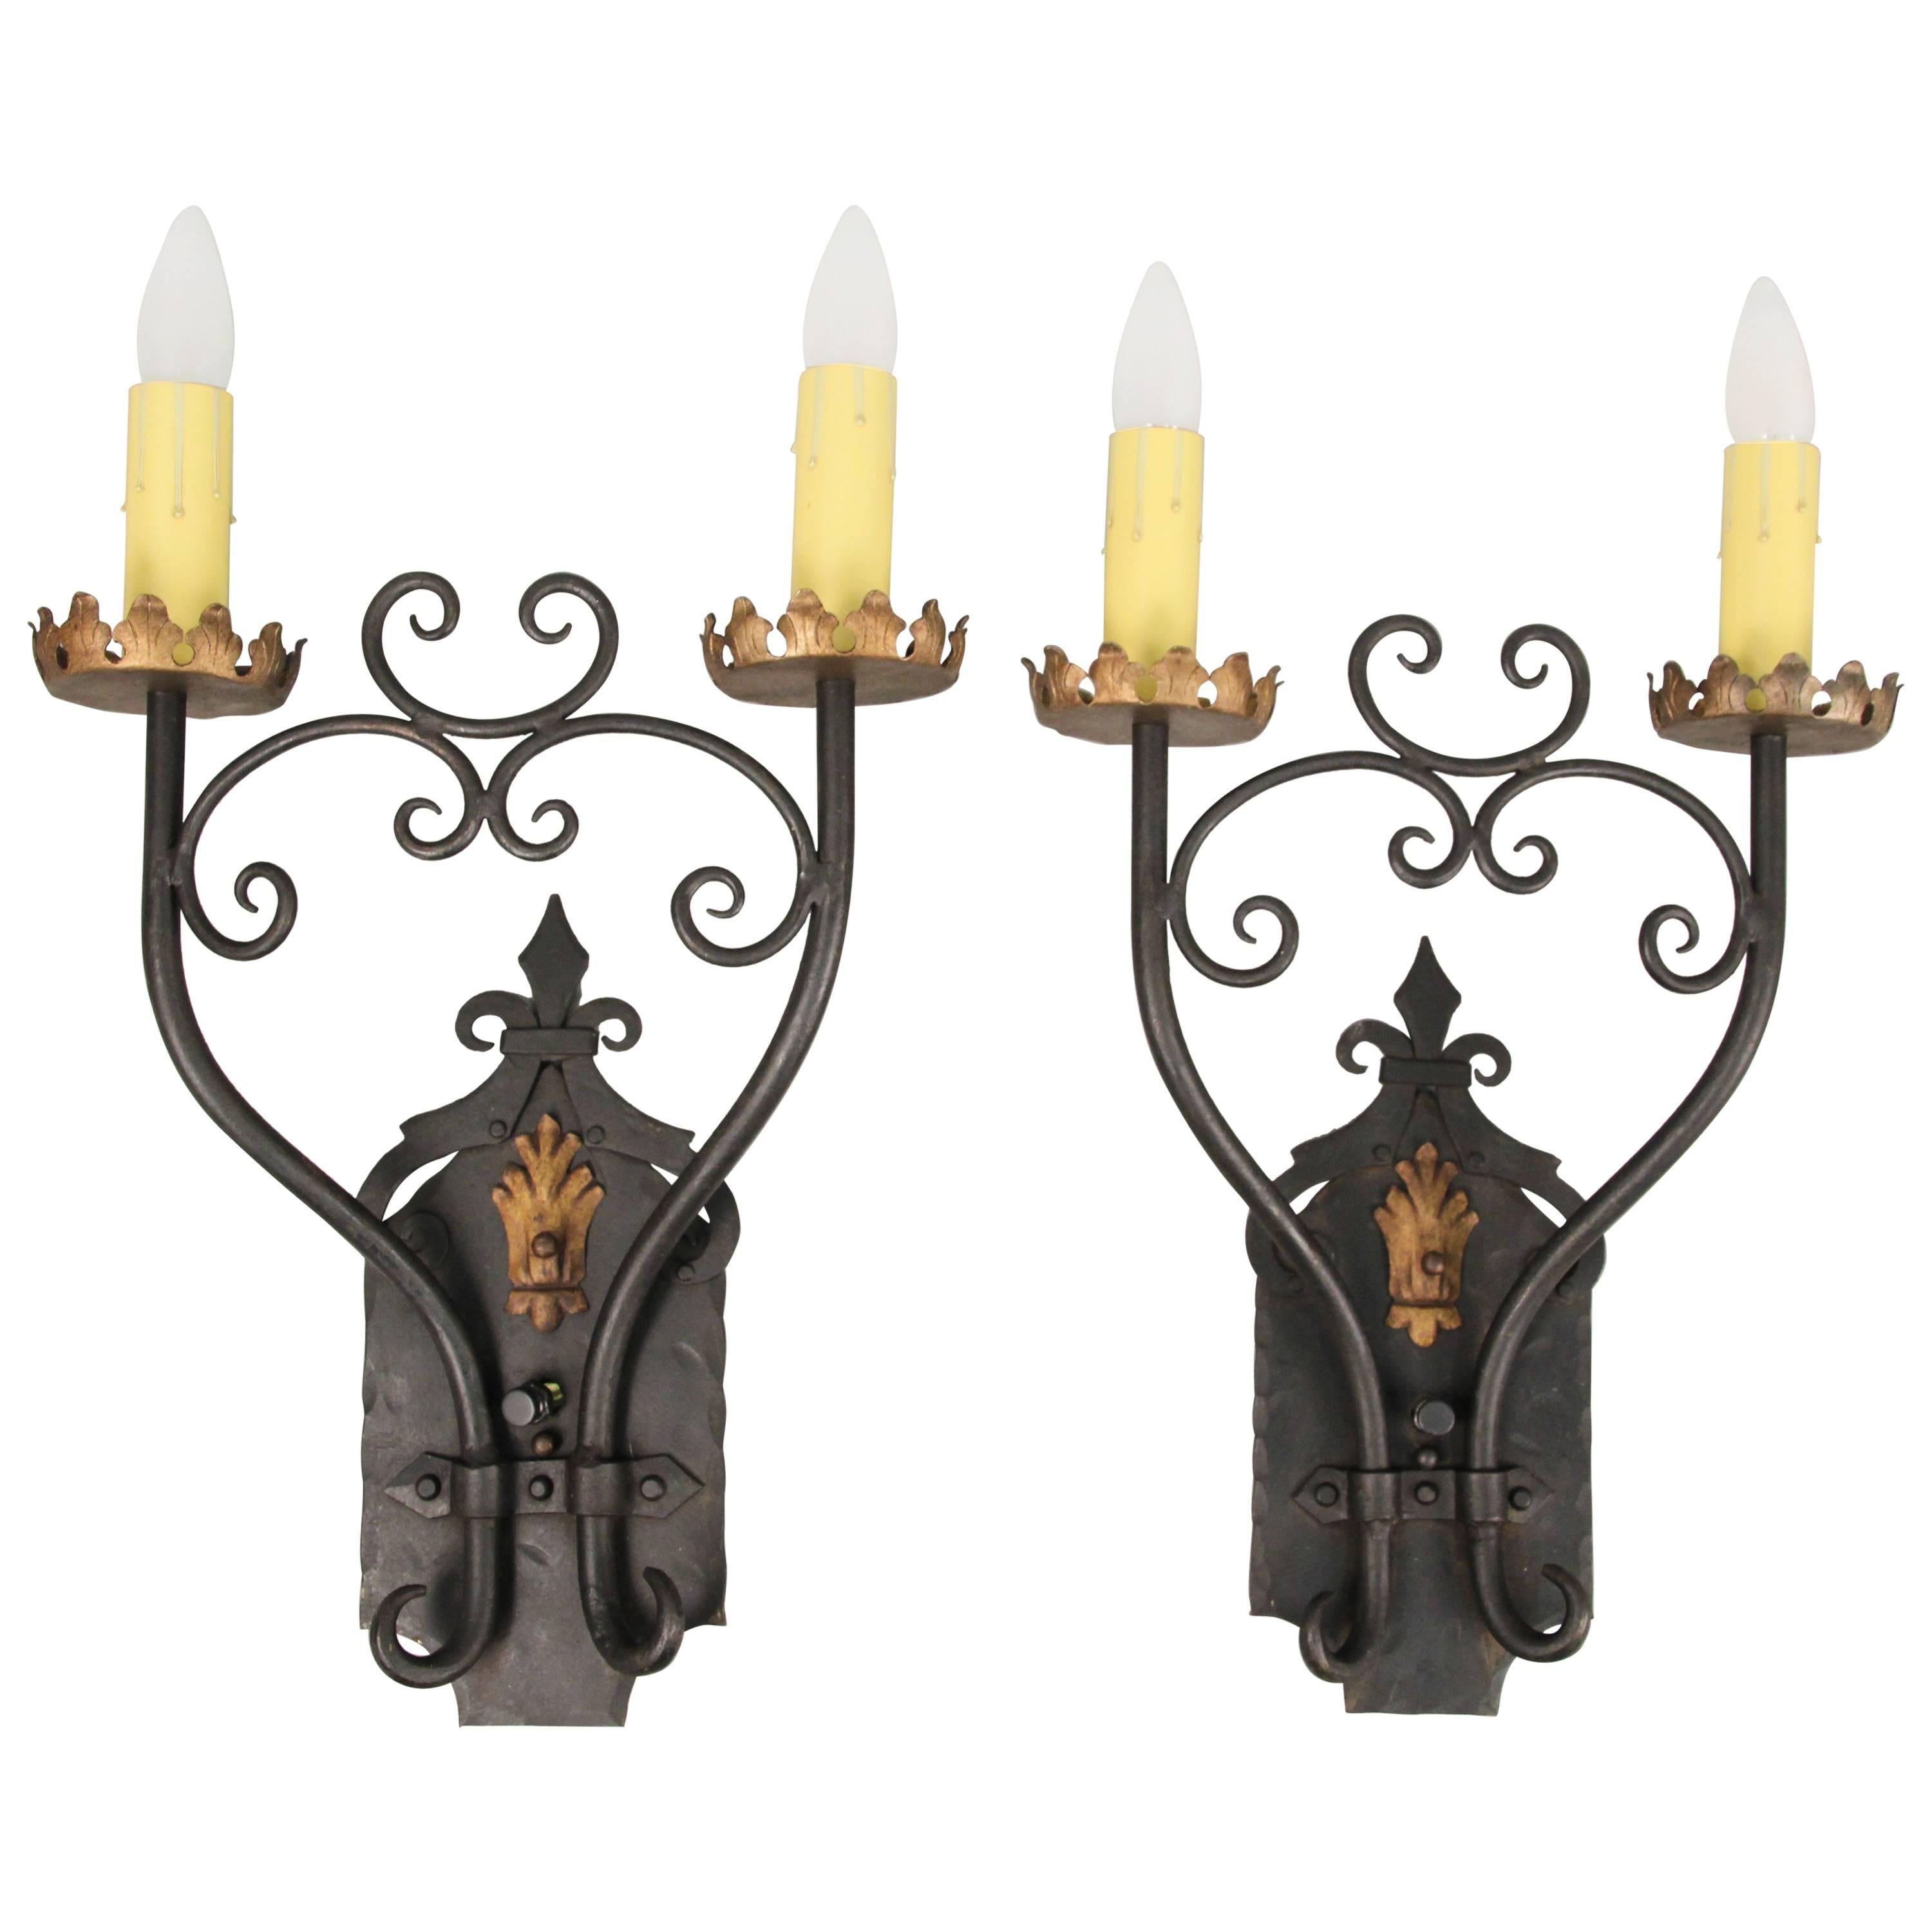 Large-Scale 1920s Wrought Iron Sconces